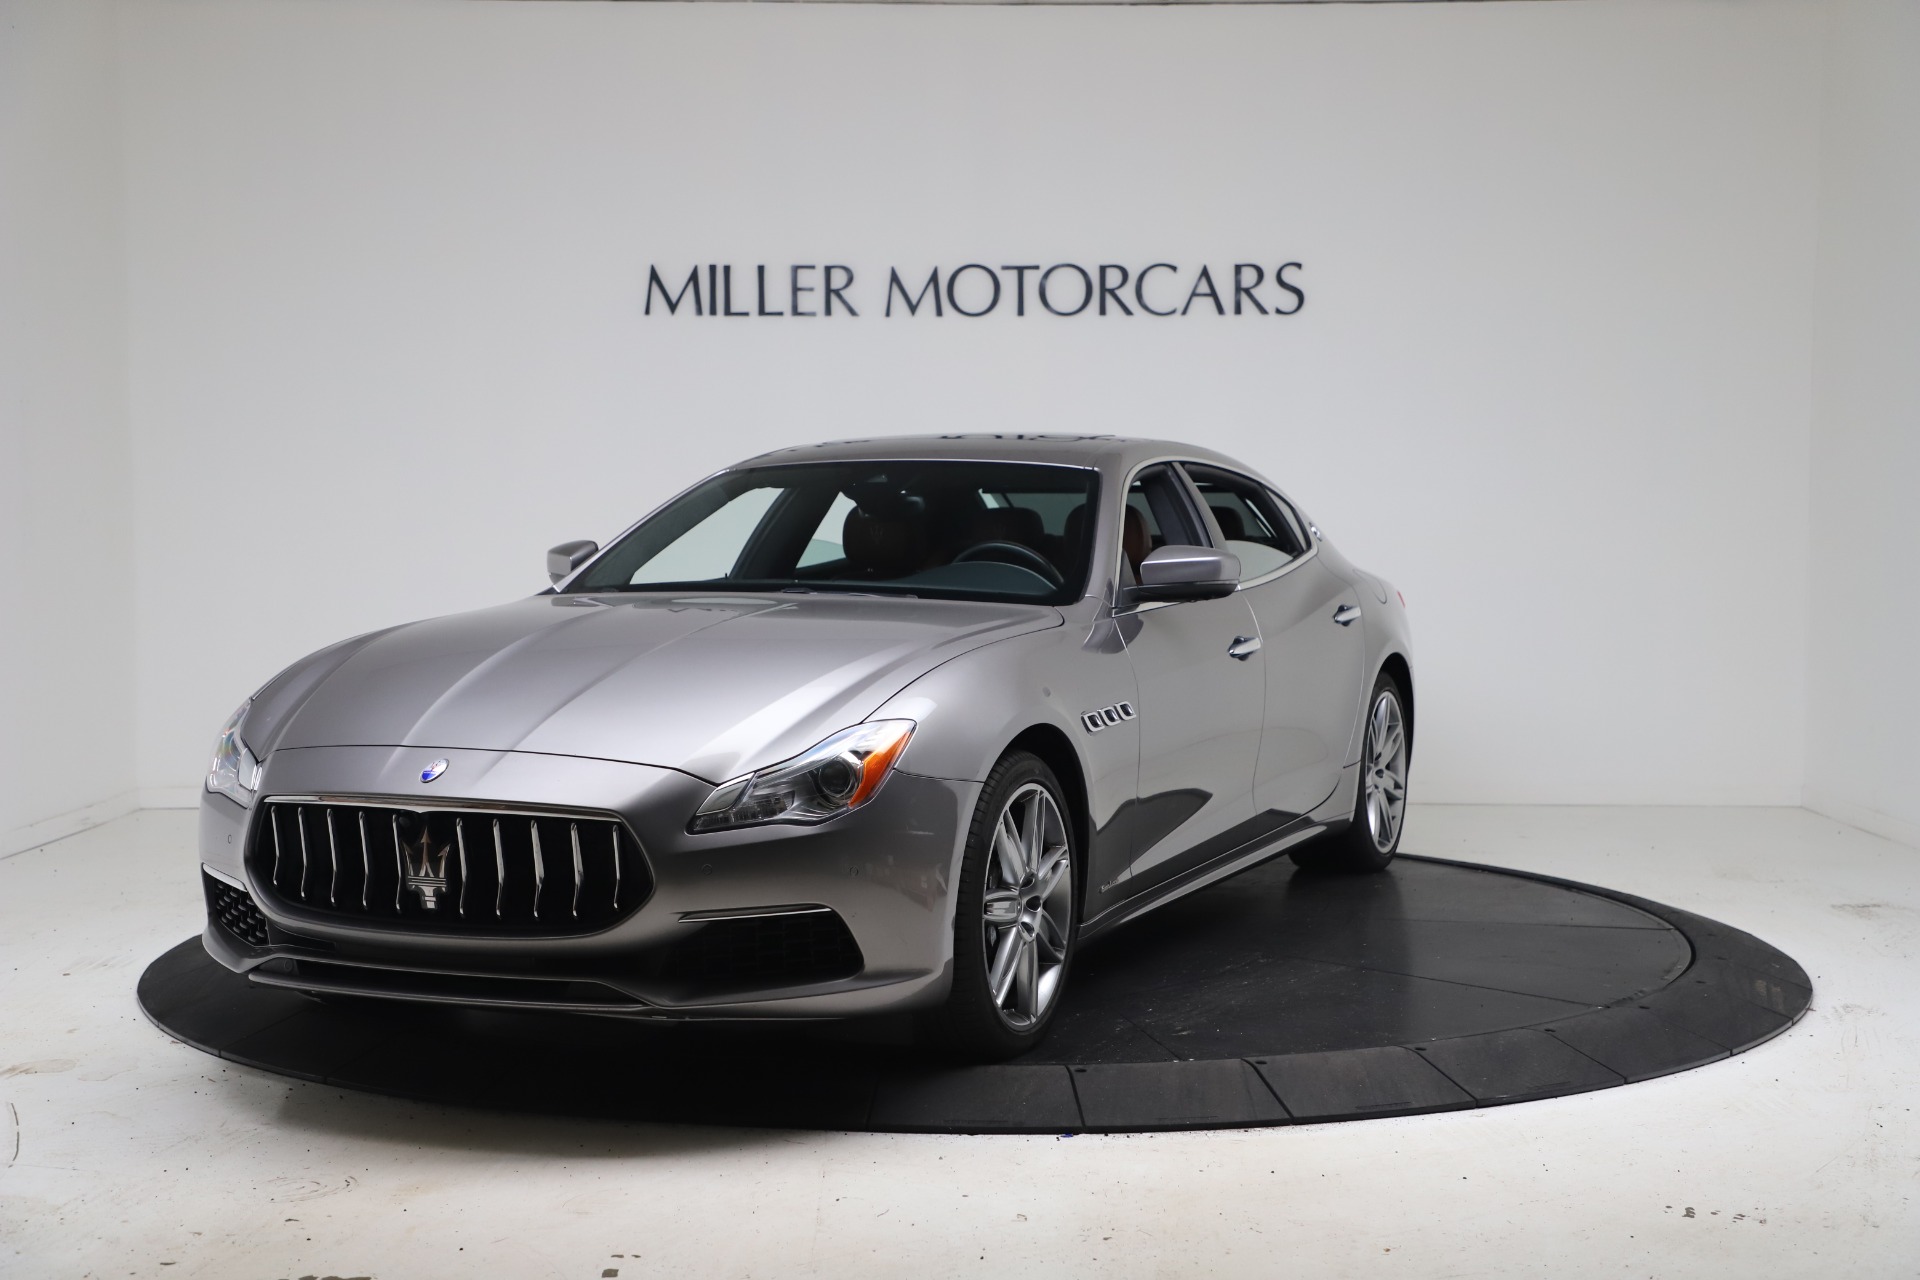 Used 2017 Maserati Quattroporte SQ4 GranLusso/ Zegna for sale Sold at Rolls-Royce Motor Cars Greenwich in Greenwich CT 06830 1